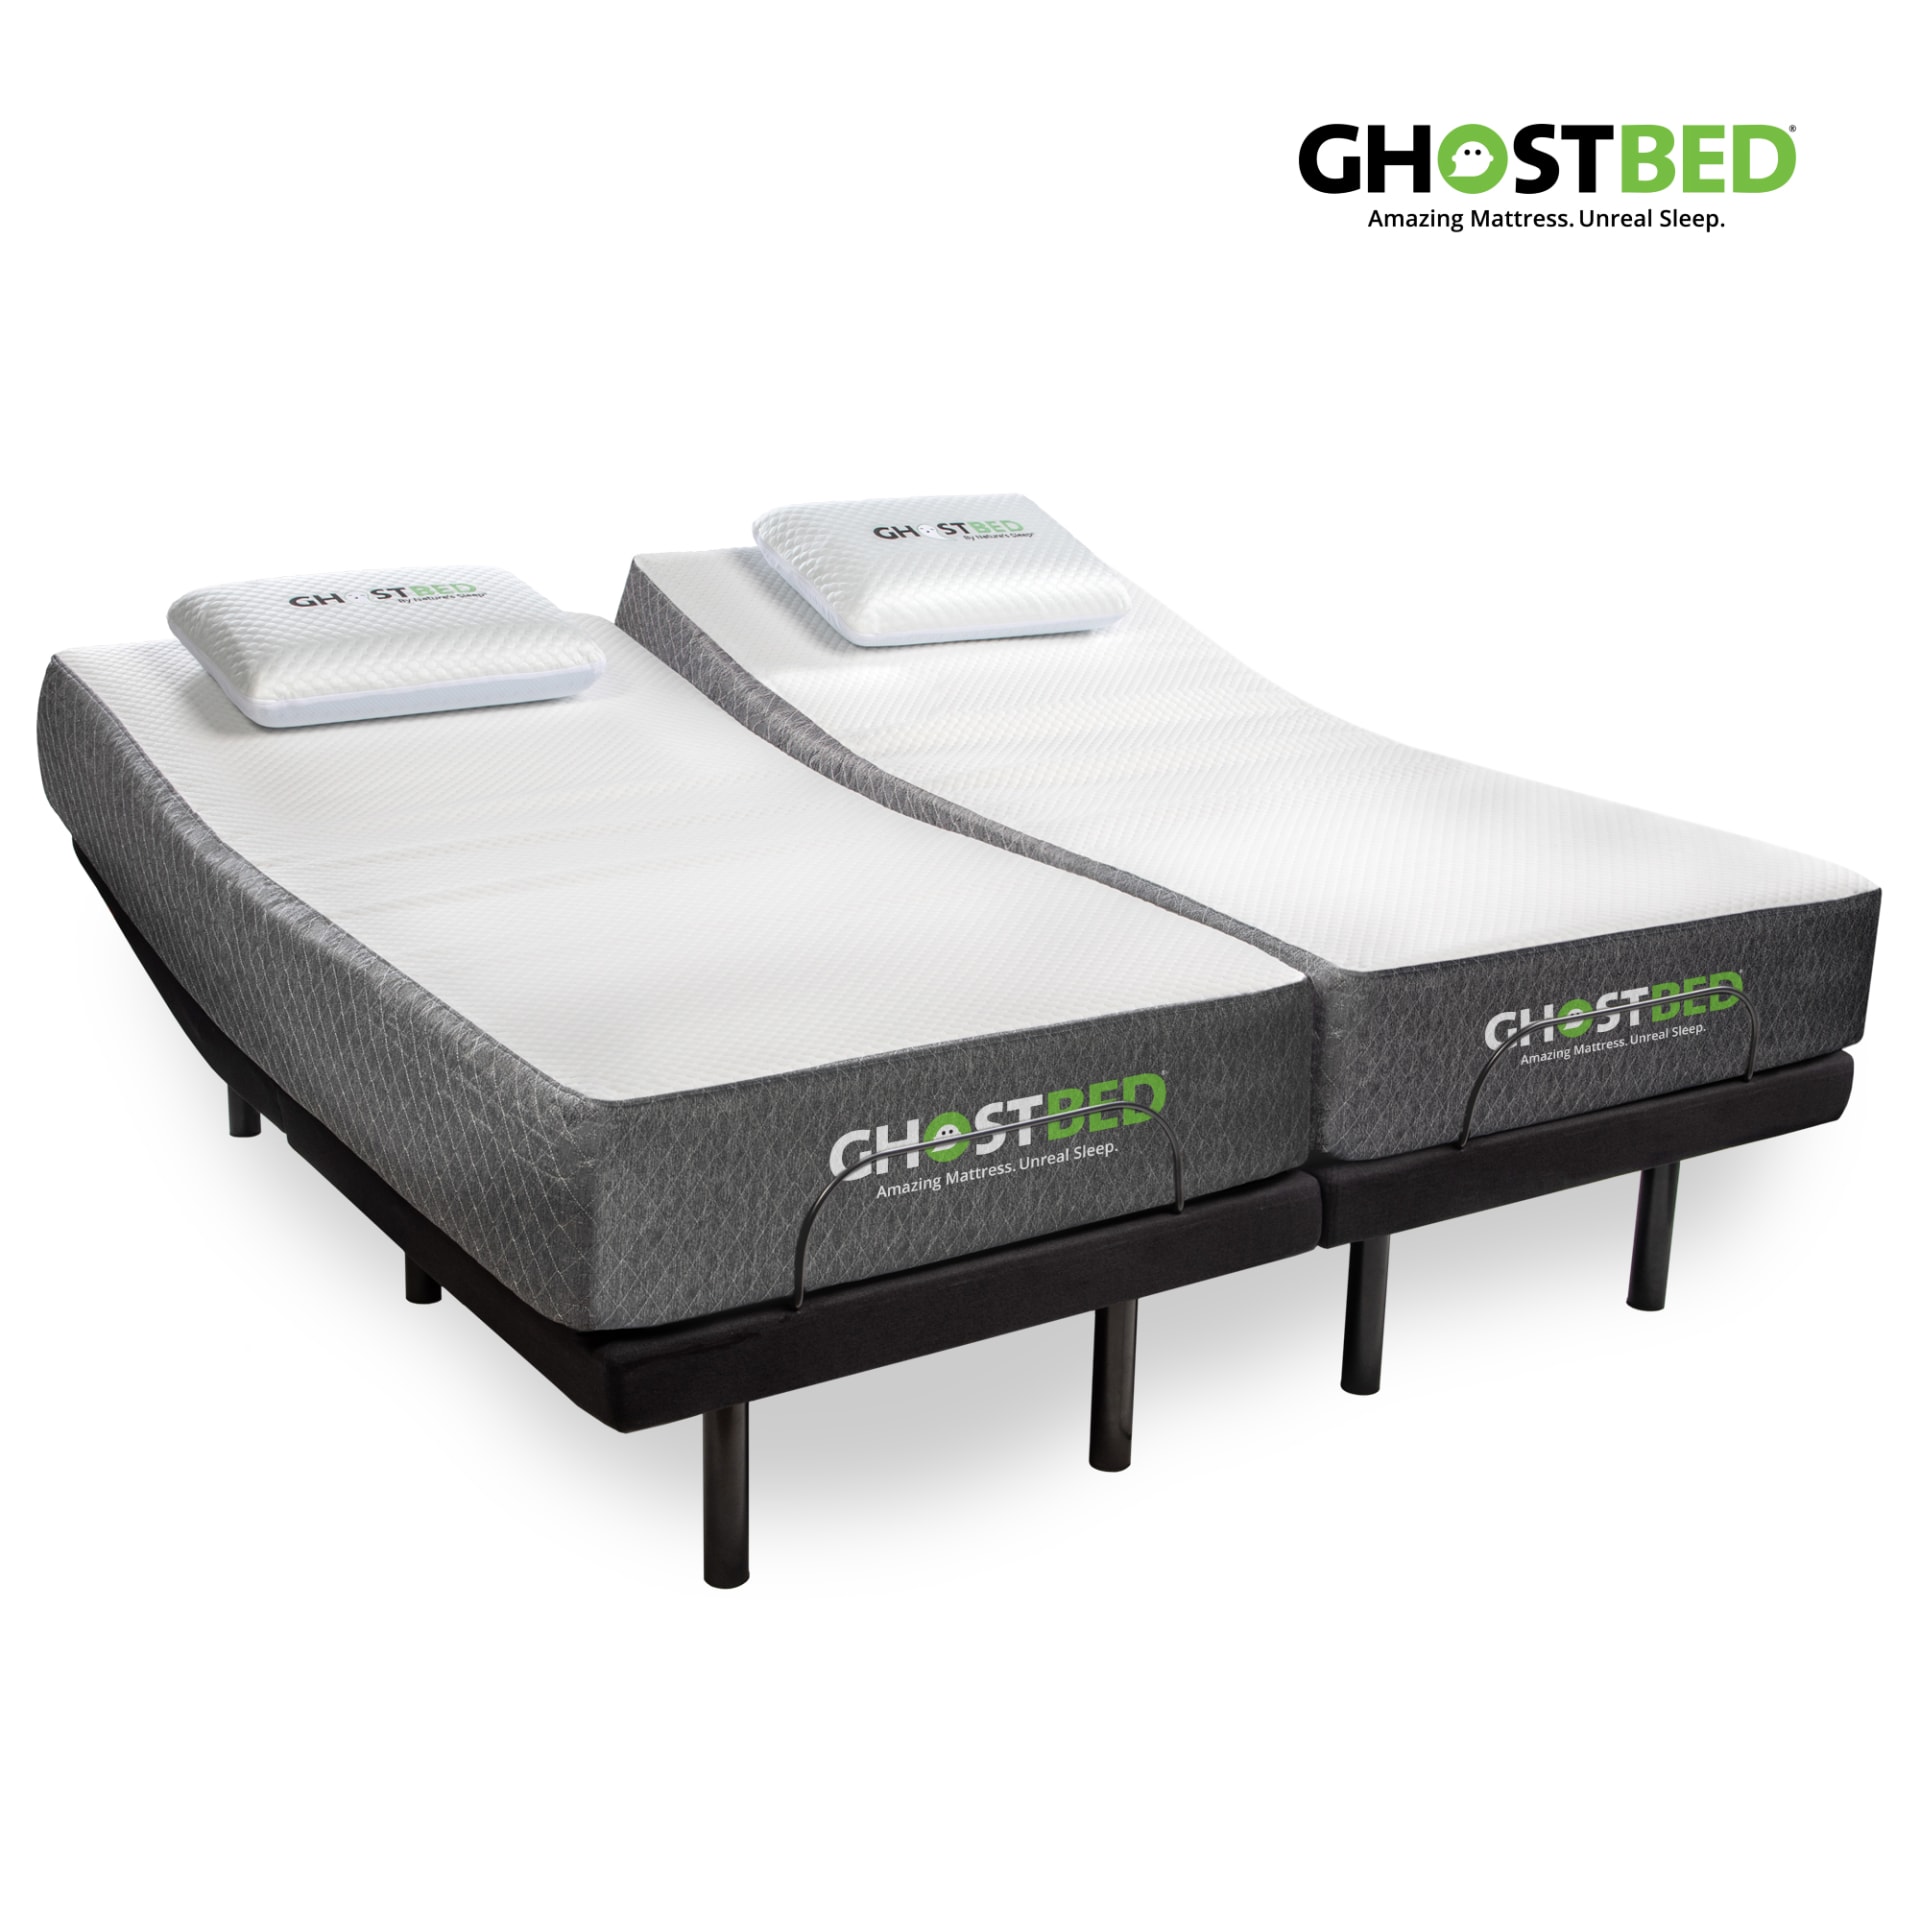 Ghostbed 11 Memory Foam Mattress With, Split King Size Bed Frame